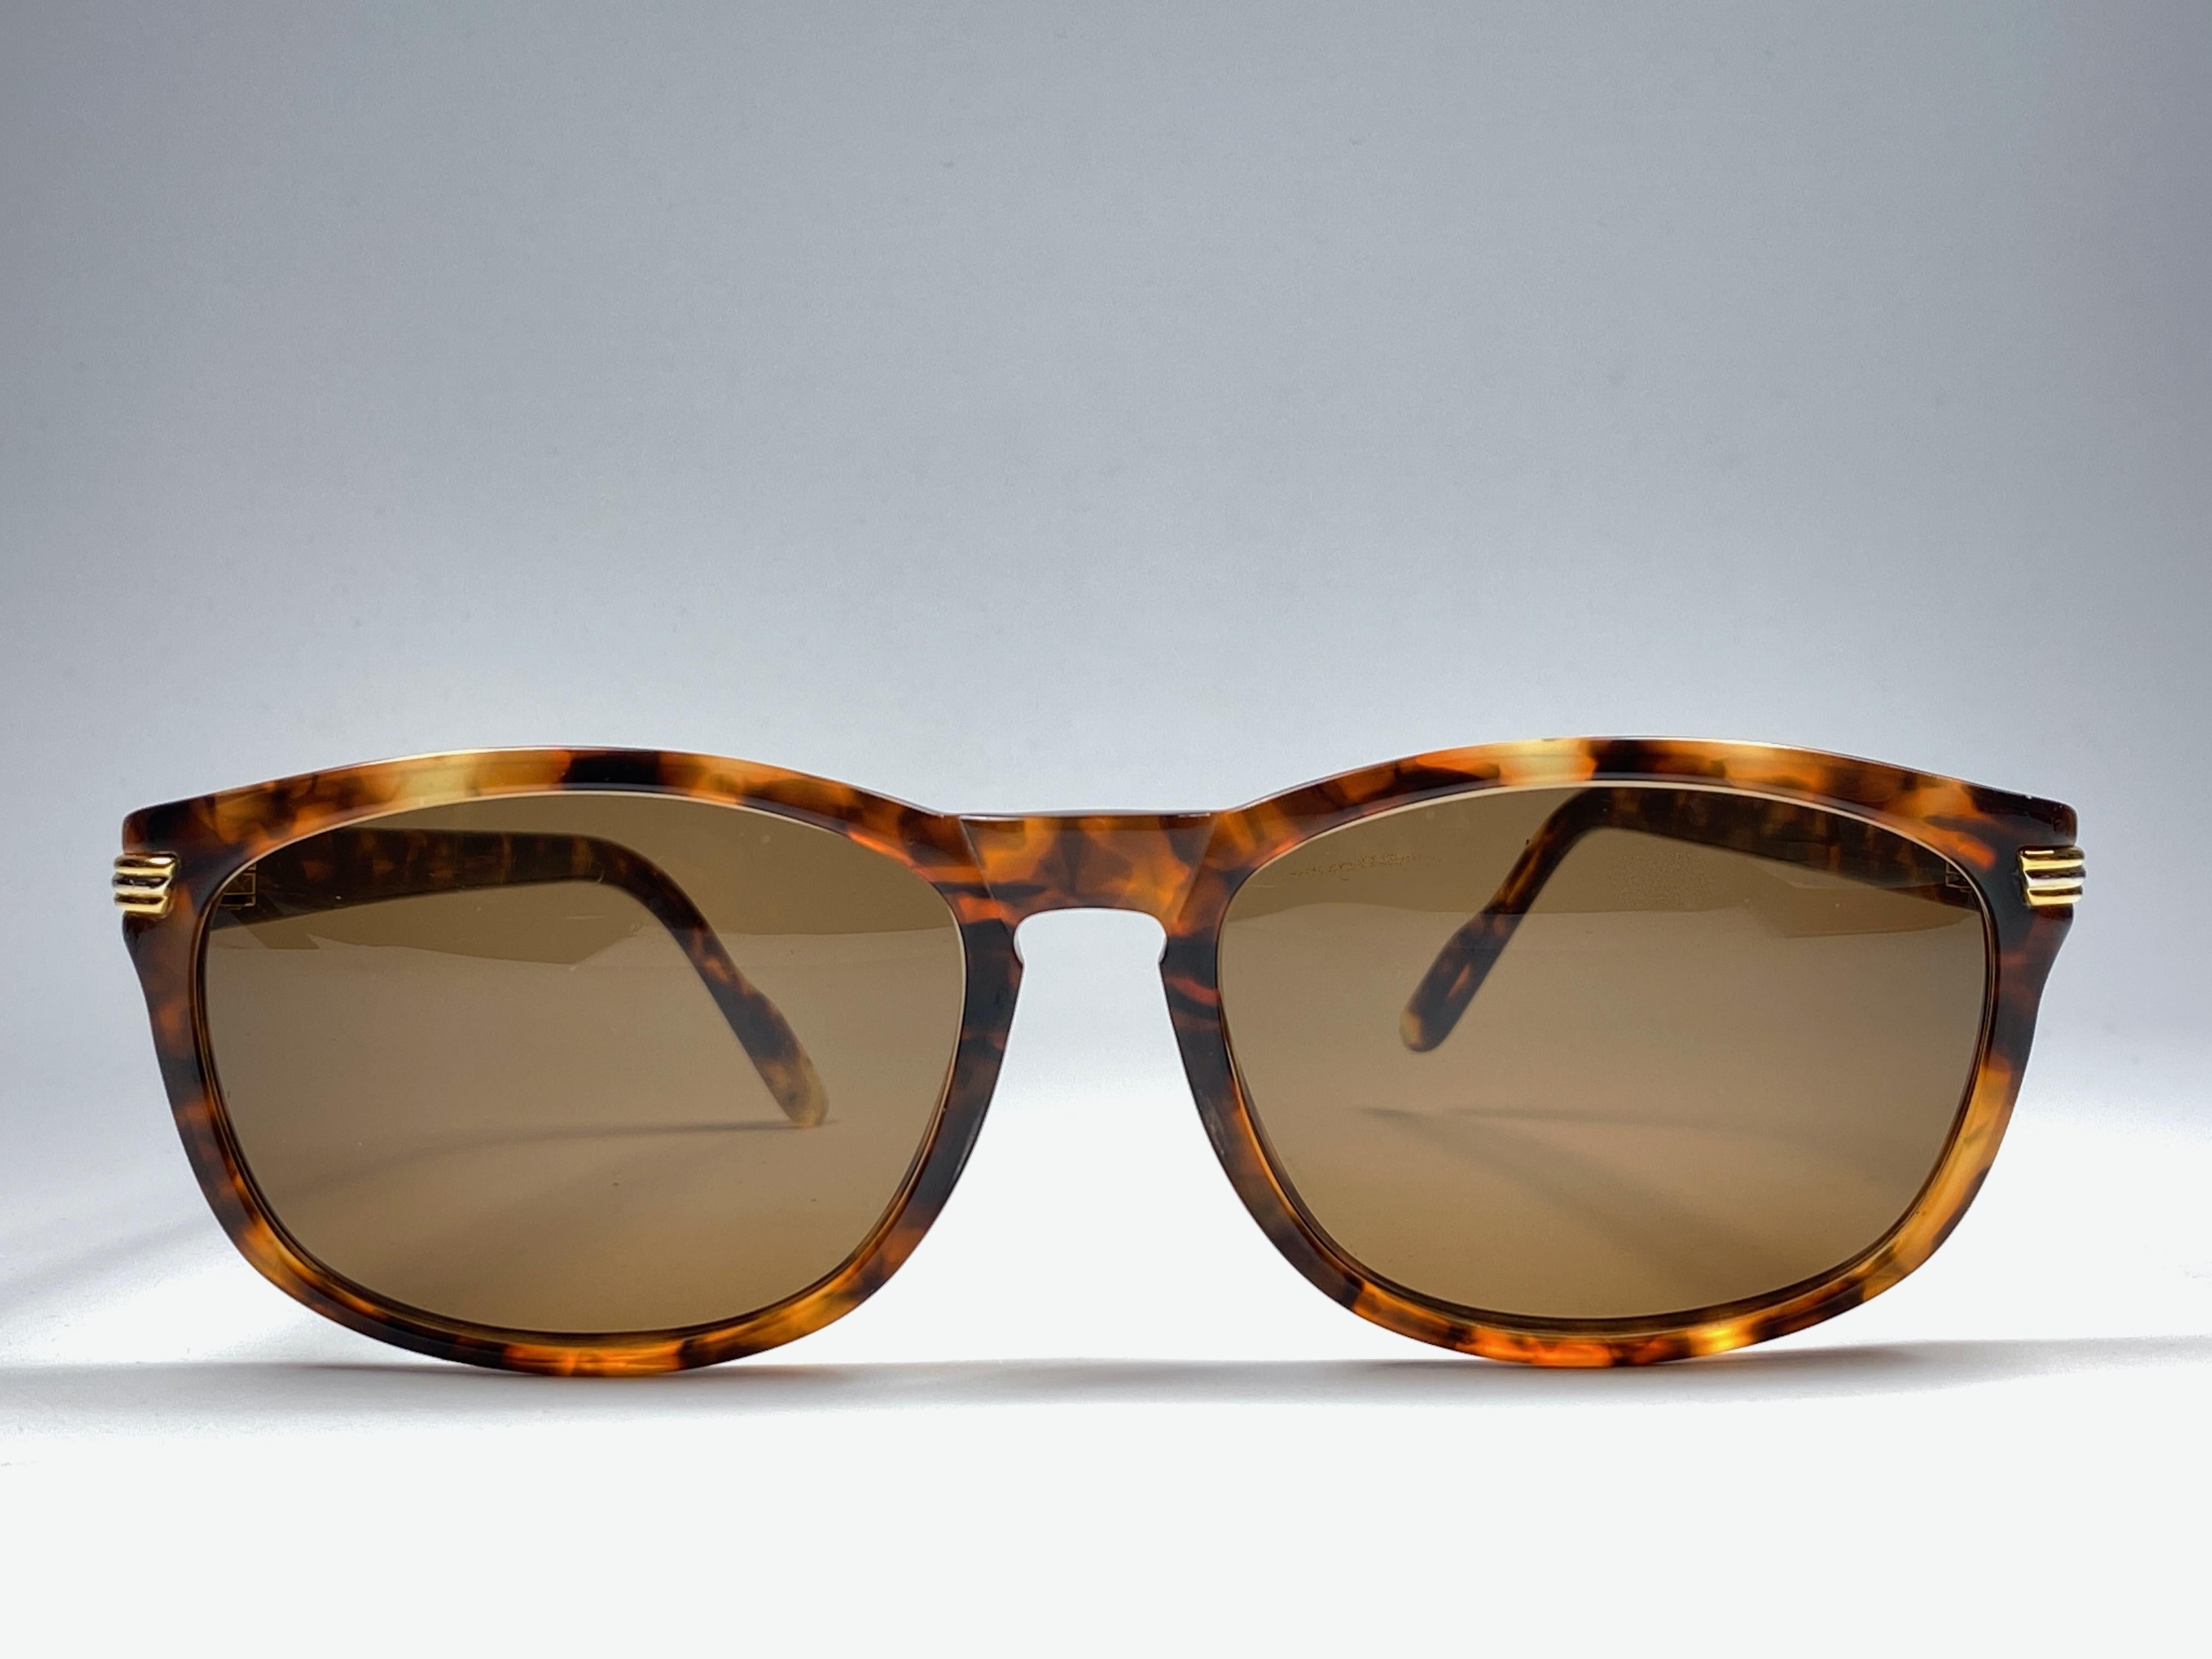 Mint Cartier Panama in tortoise with light brown (uv protection) lenses. 
Frame is tortoise and has the famous real gold and white gold accents. All hallmarks. 
These are like a pair of jewels on your nose with the 18k heavy gold plated accents.